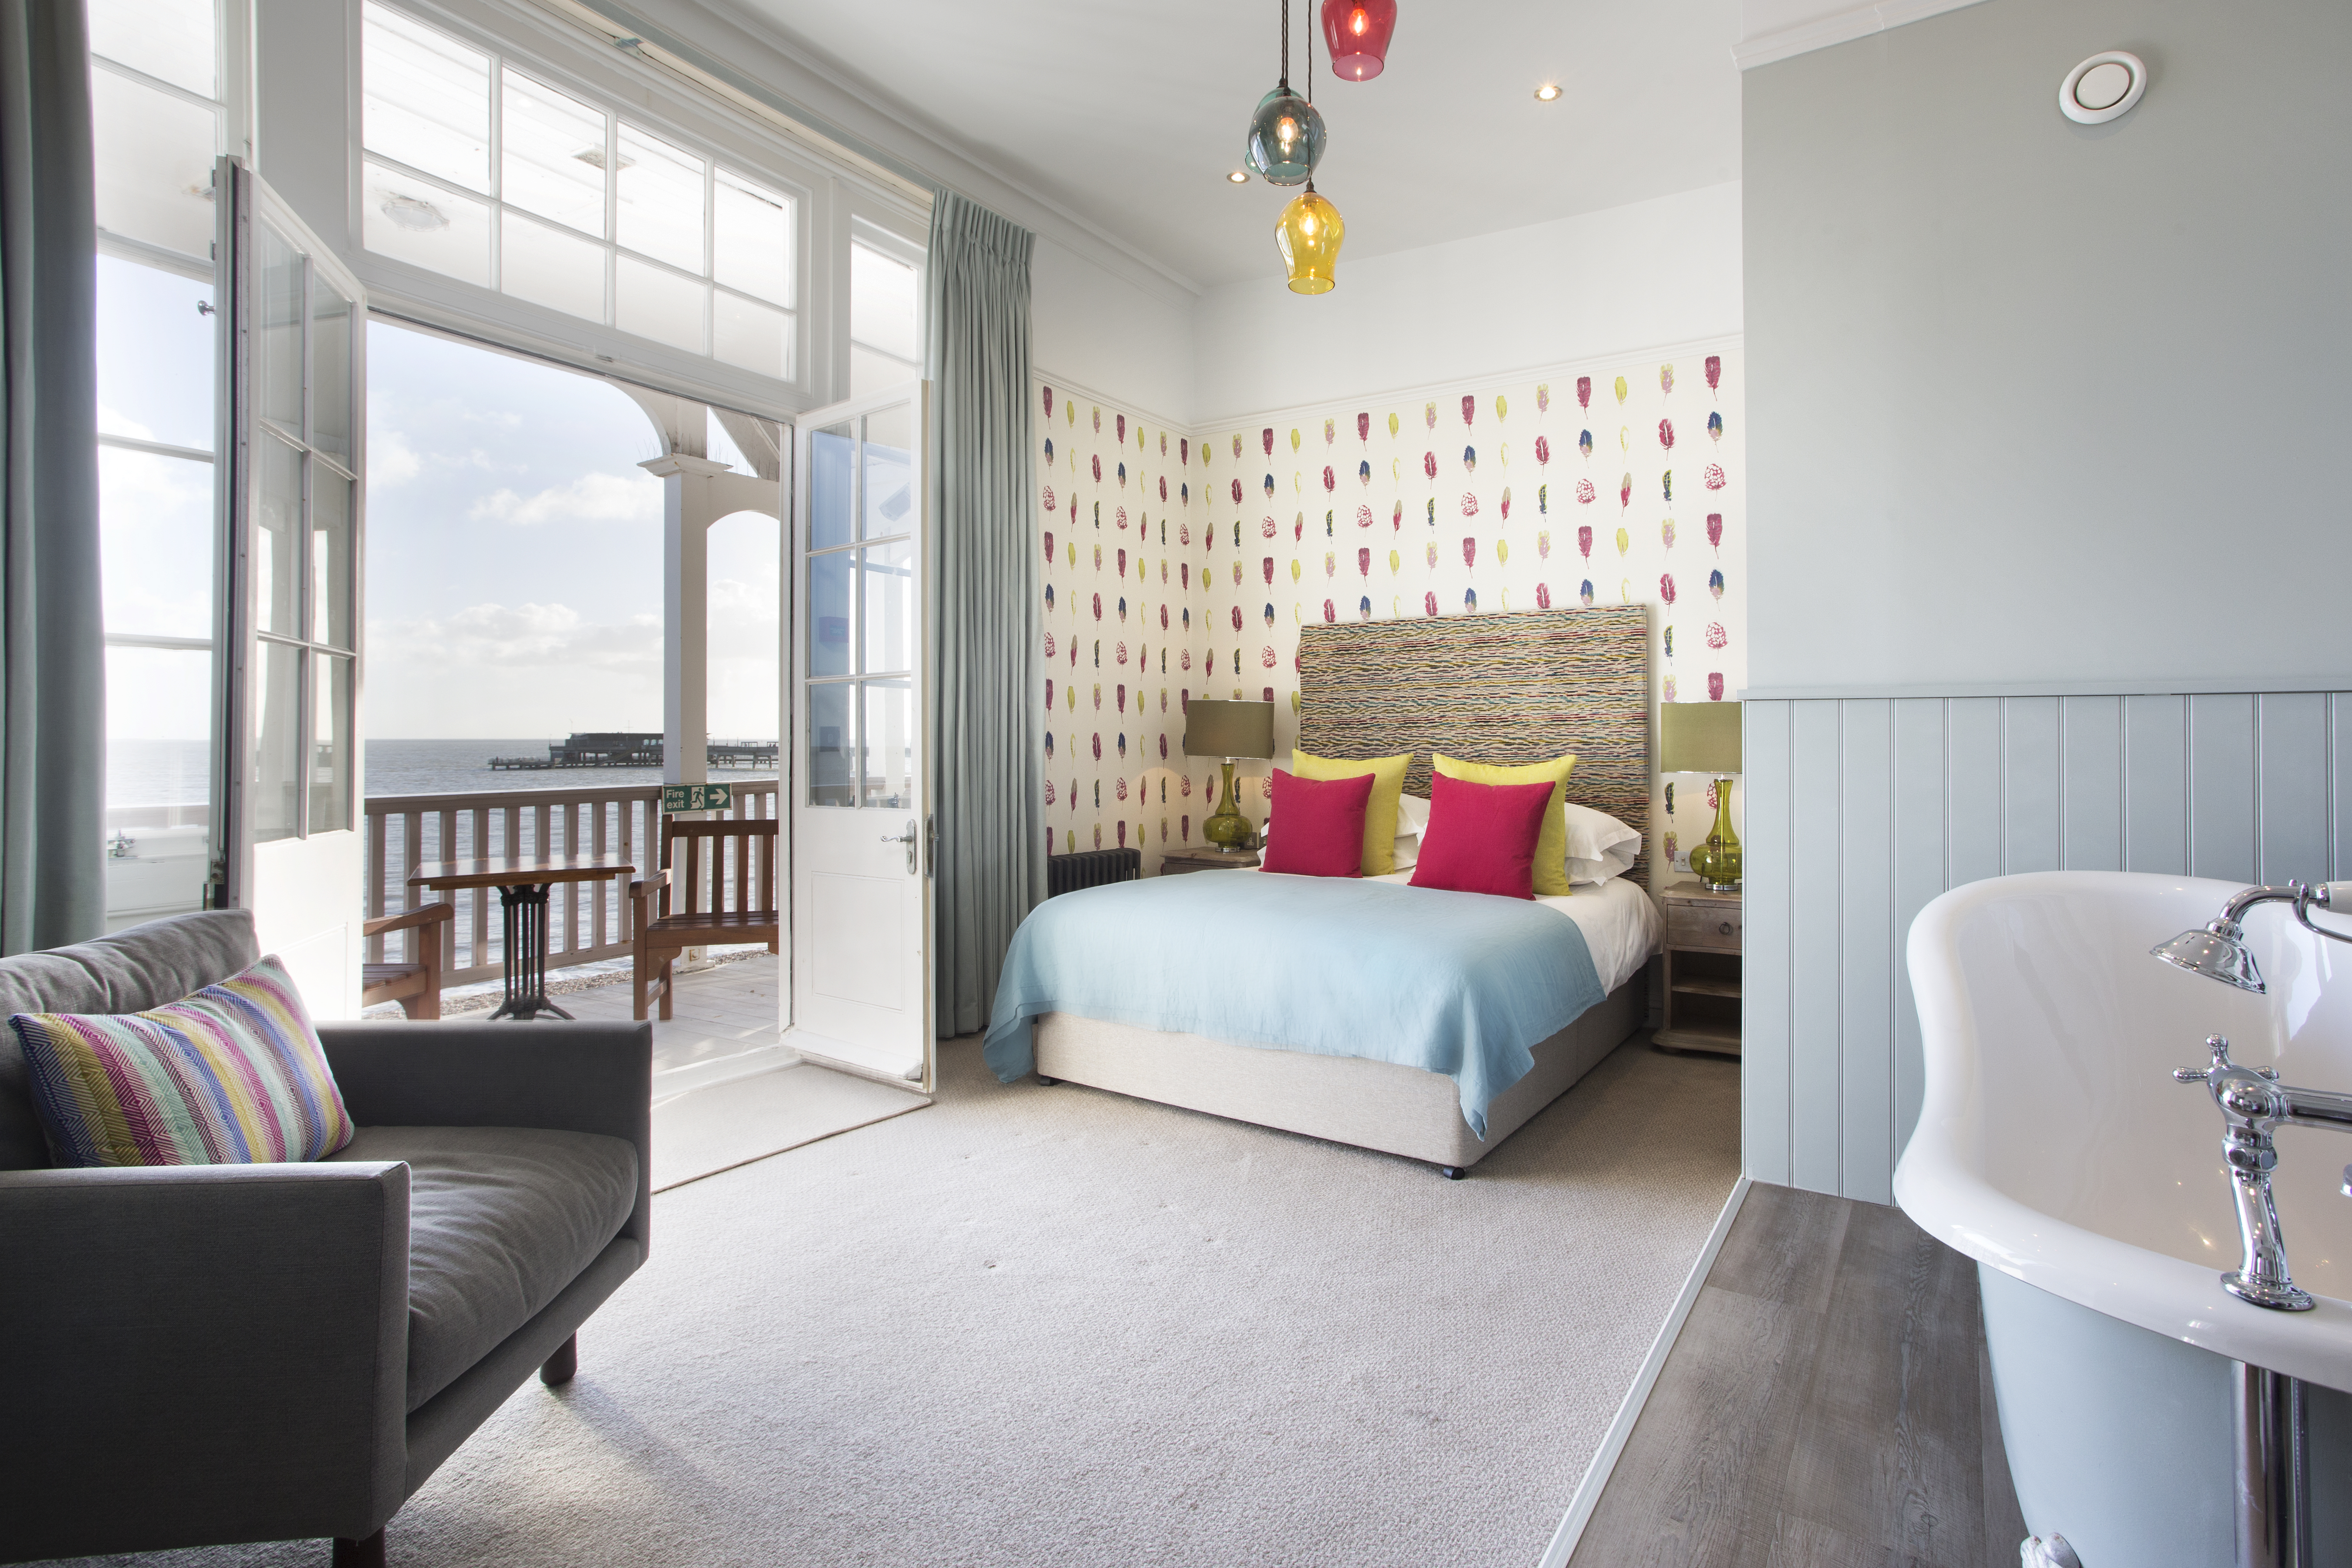 Royal Hotel, Deal, Kent, Seafront, Sea view, Nelson Feature Bedroom, bath